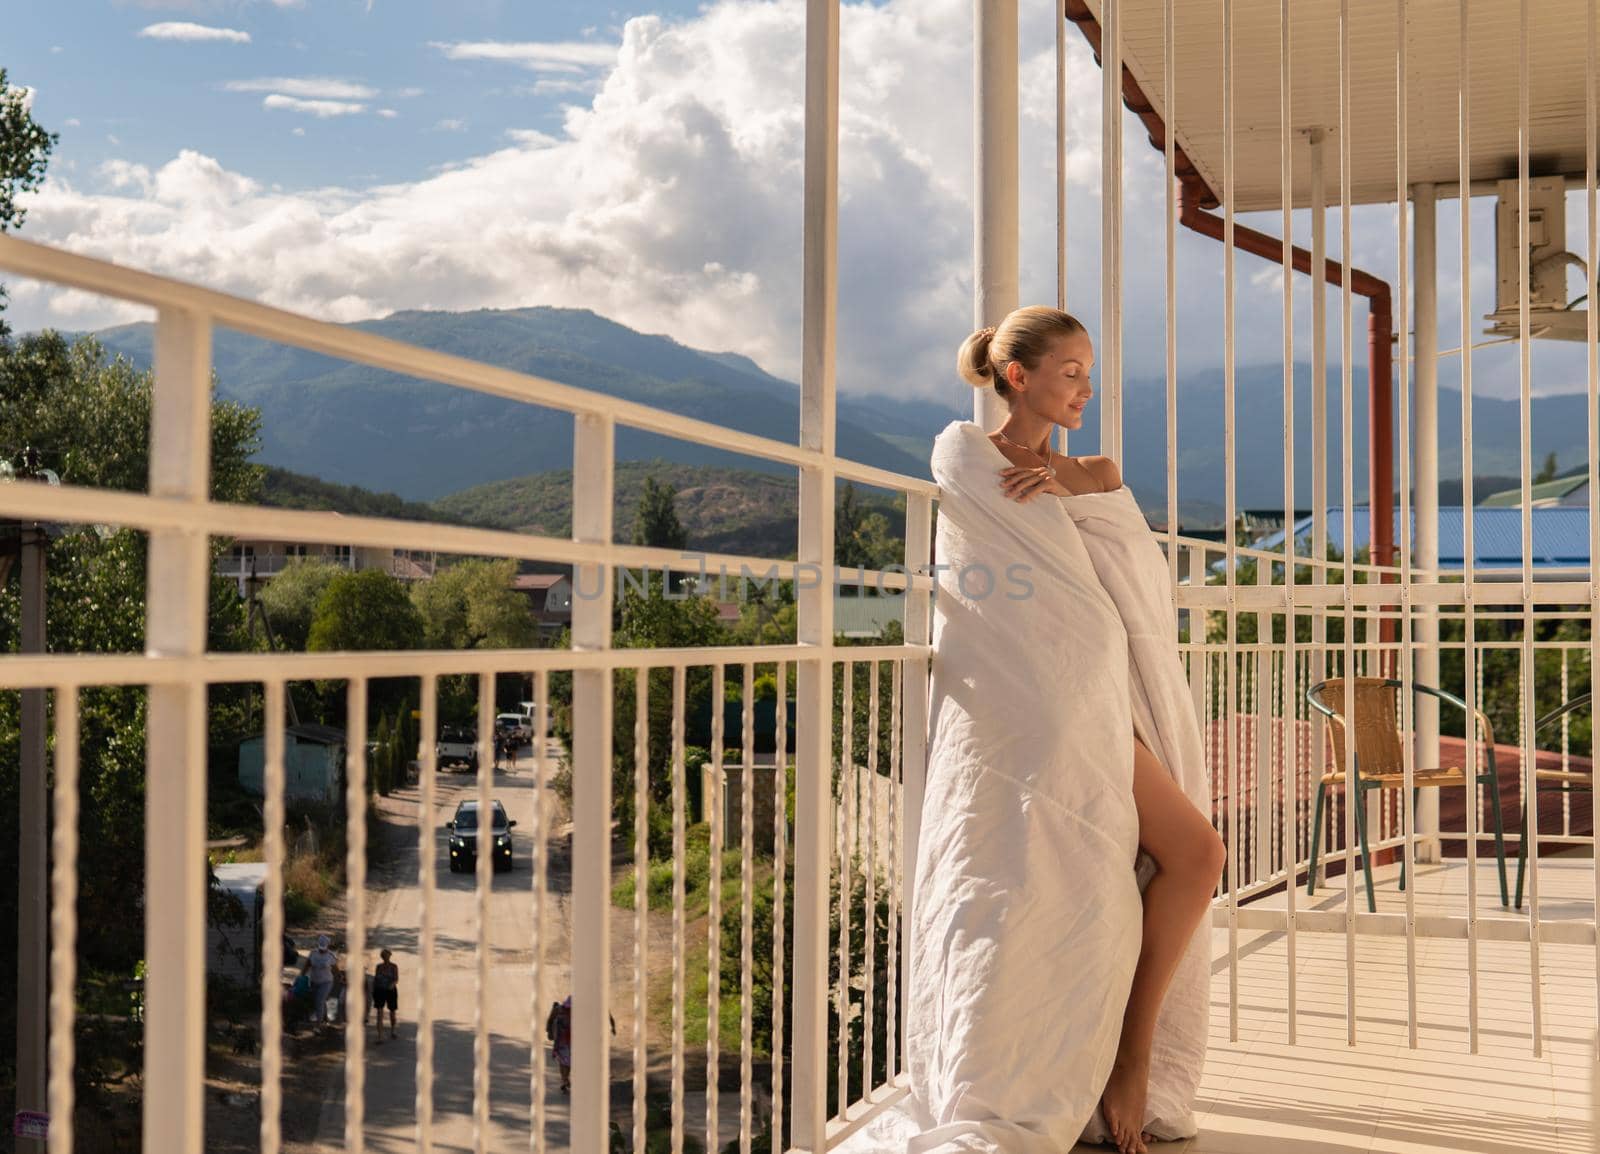 The girl sits on the balcony of the mountains and the blue sky on the background of beauty balcony caucasian lifestyle, young outdoor relax outside relaxation, morning travel. Rich lady, romantic hotel